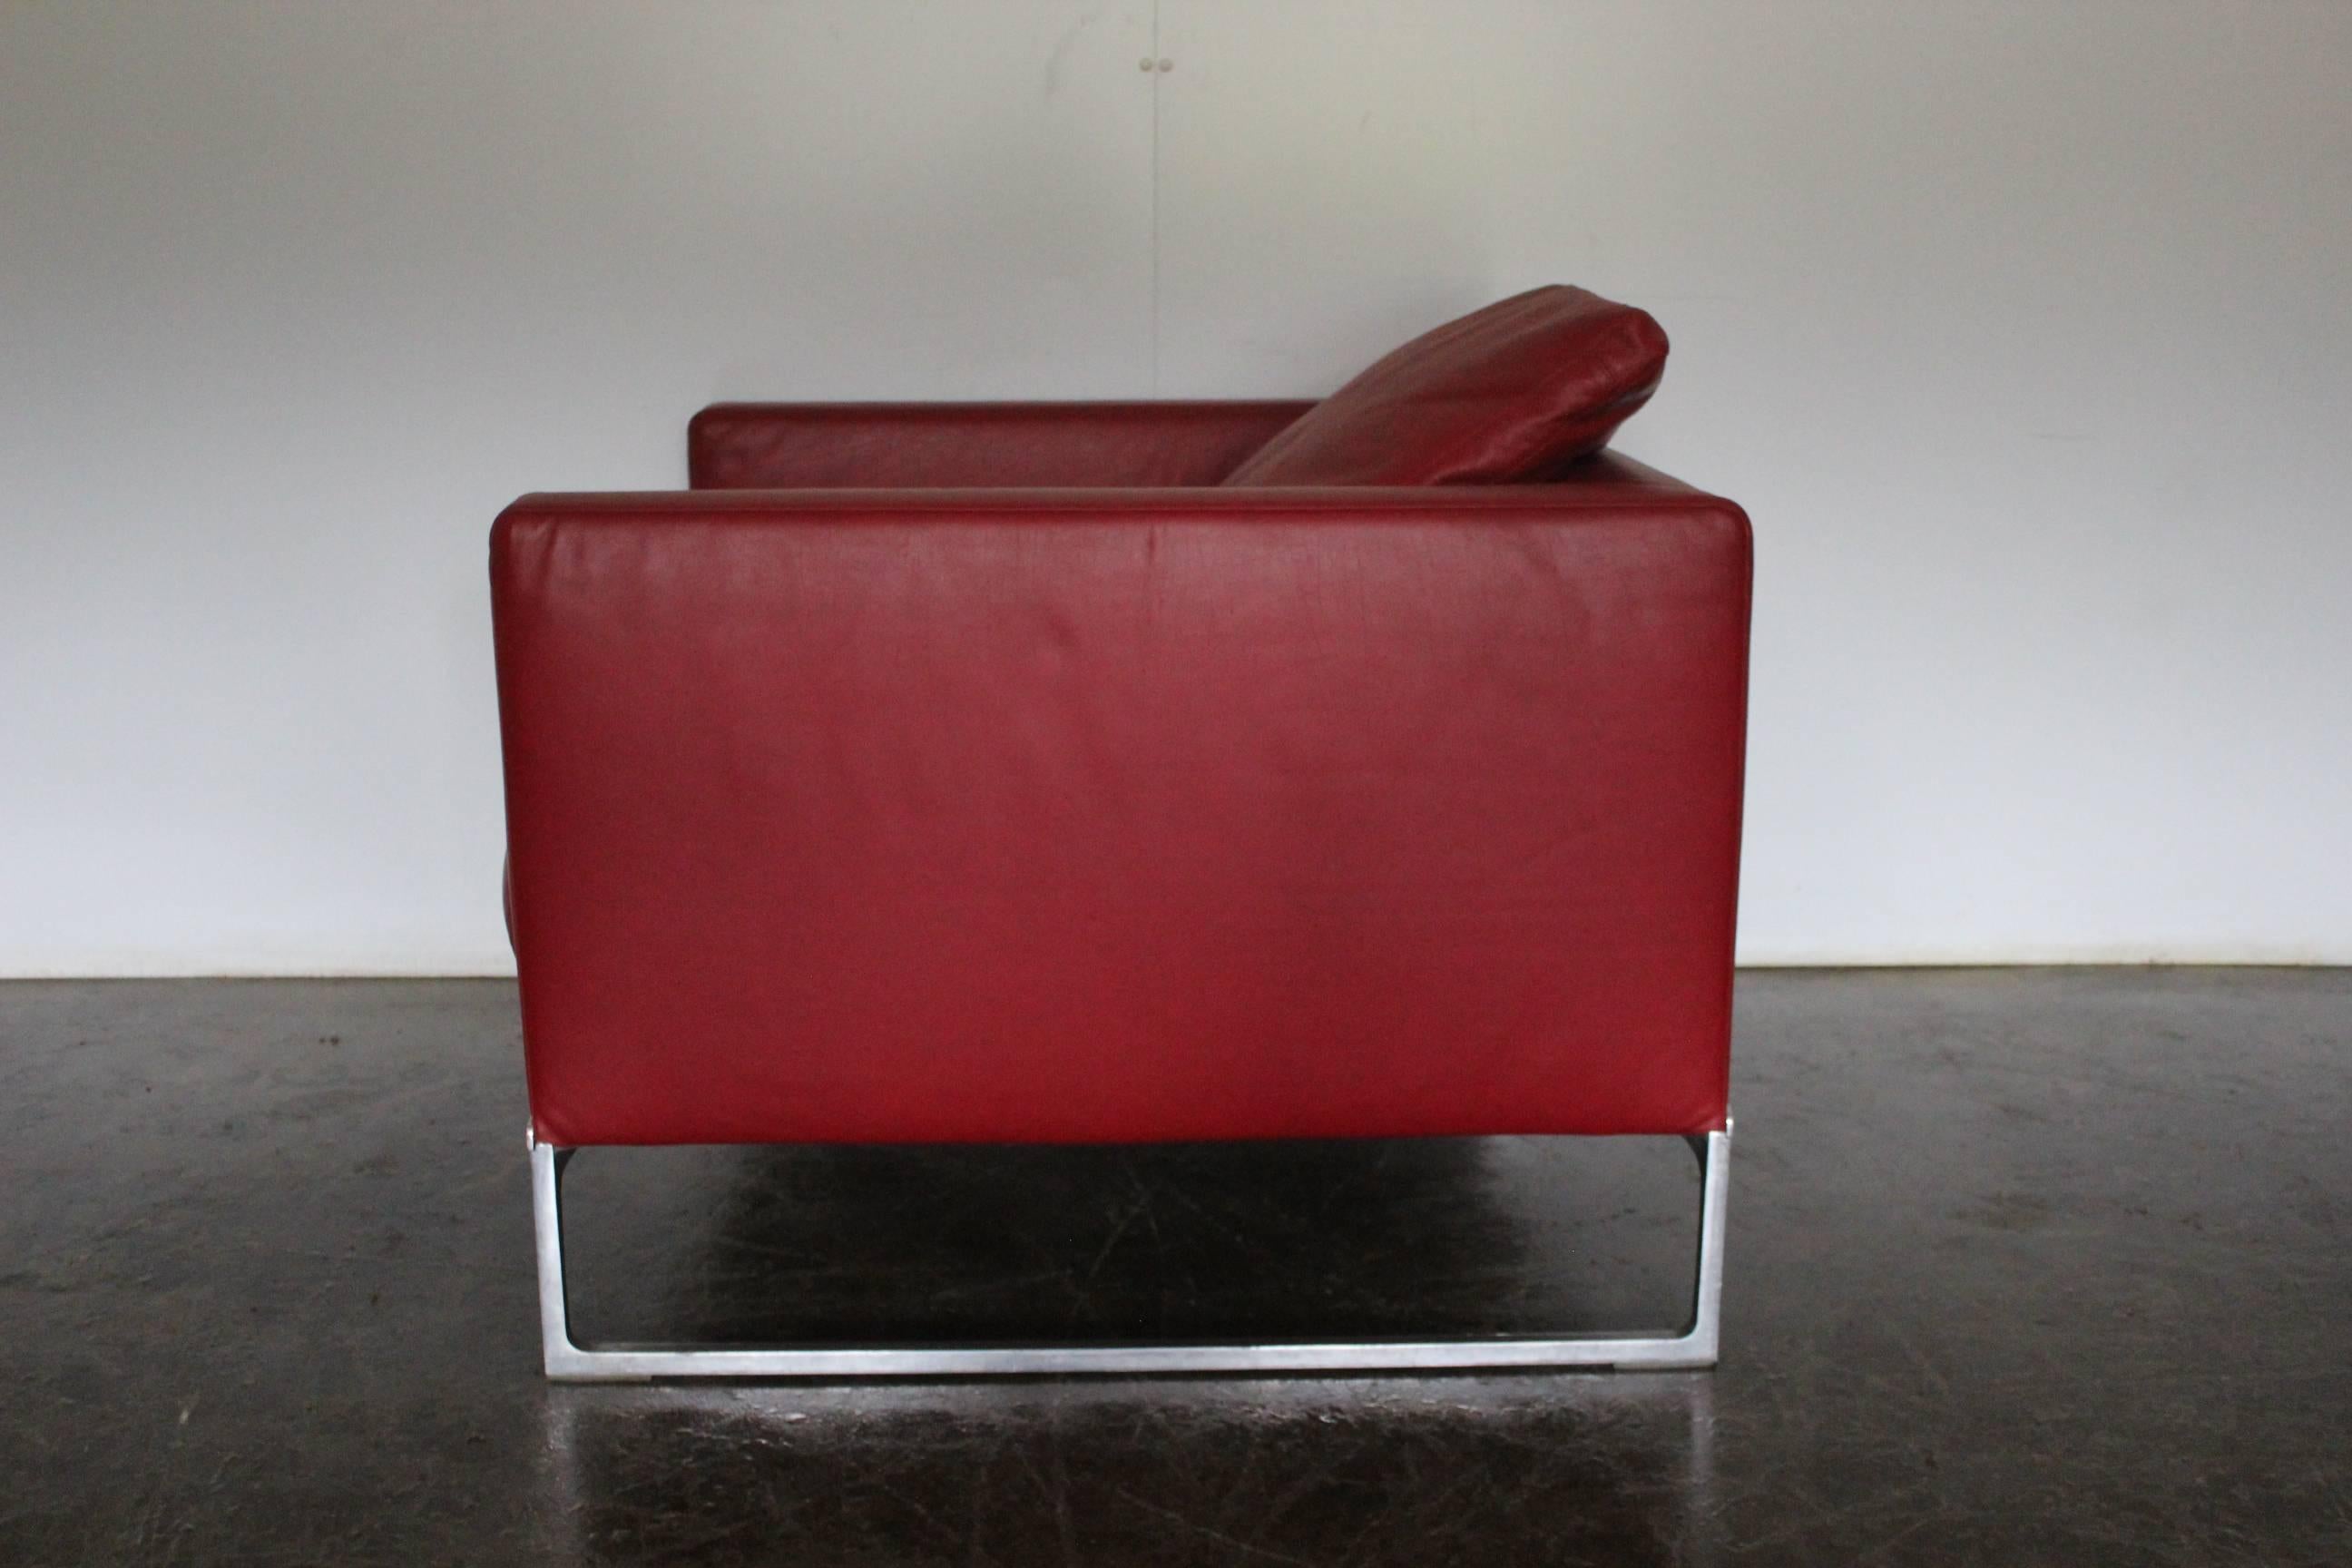 B&B Italia “Tight” Large Armchair in “Gamma” Red Leather In Excellent Condition In Barrowford, GB